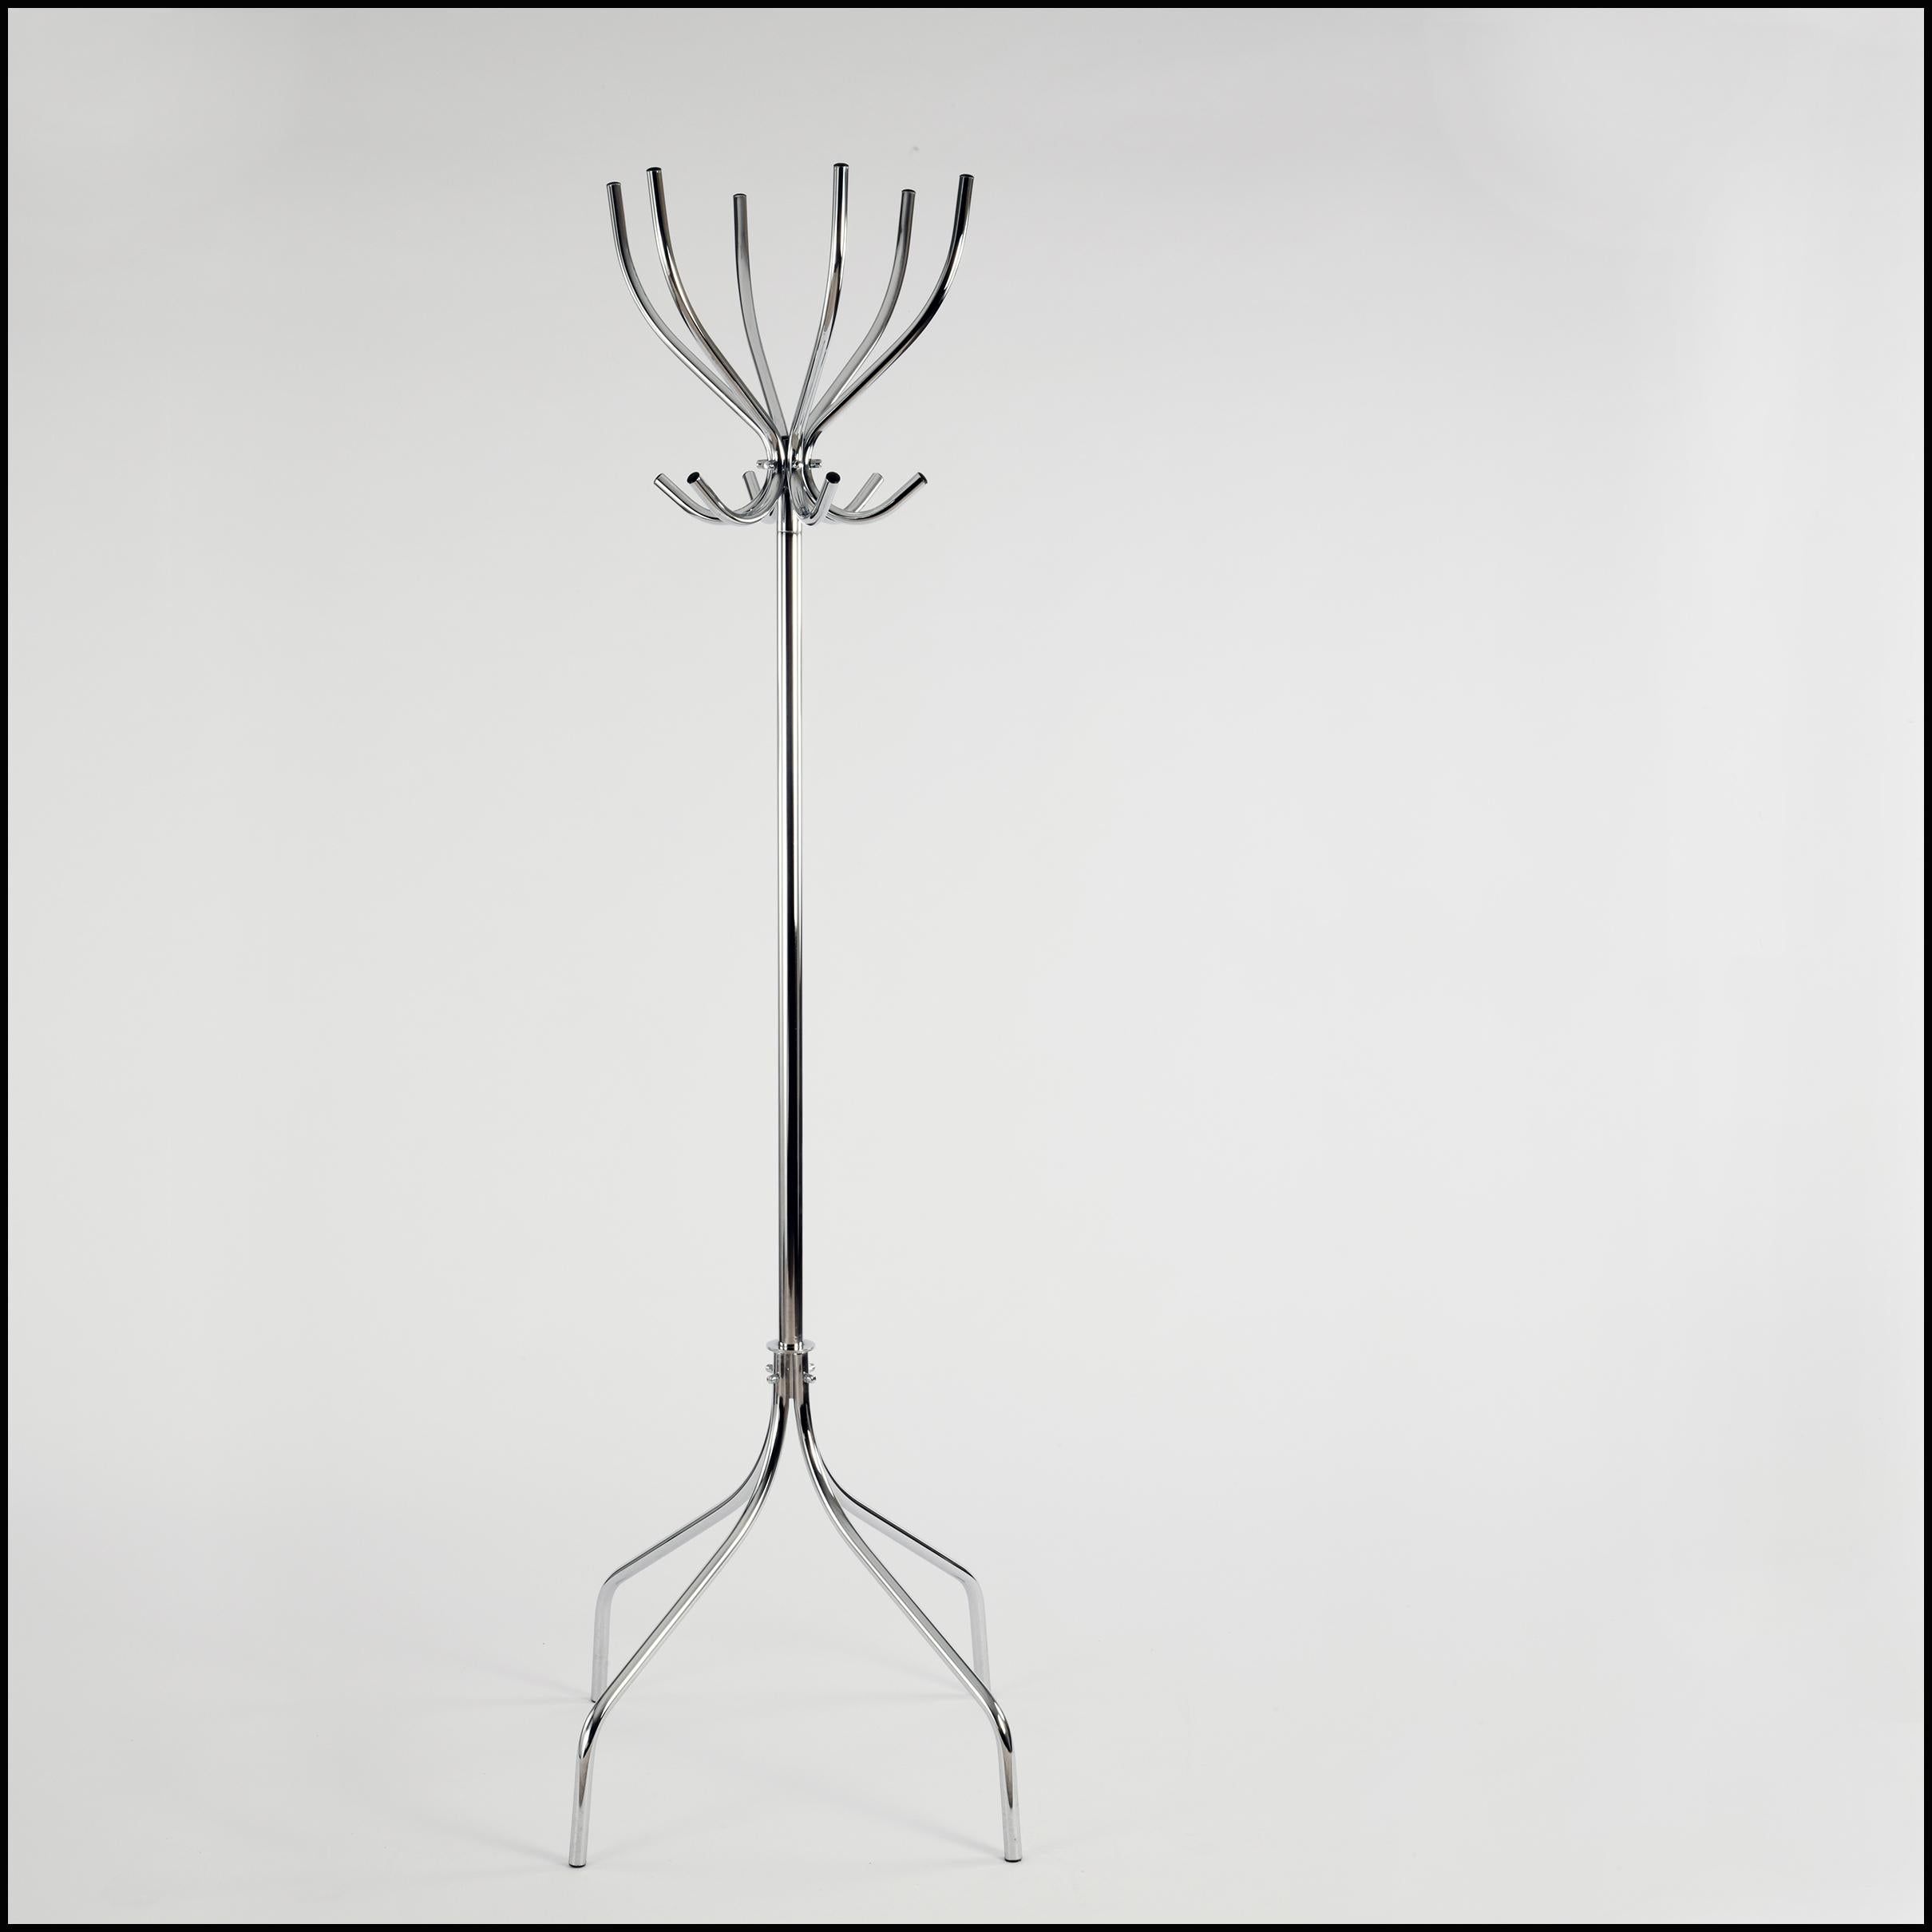 Chromed steel coat stand produced by Rörmekano in Skånes Fagerhult, Sweden, in the 1980s, known as the 